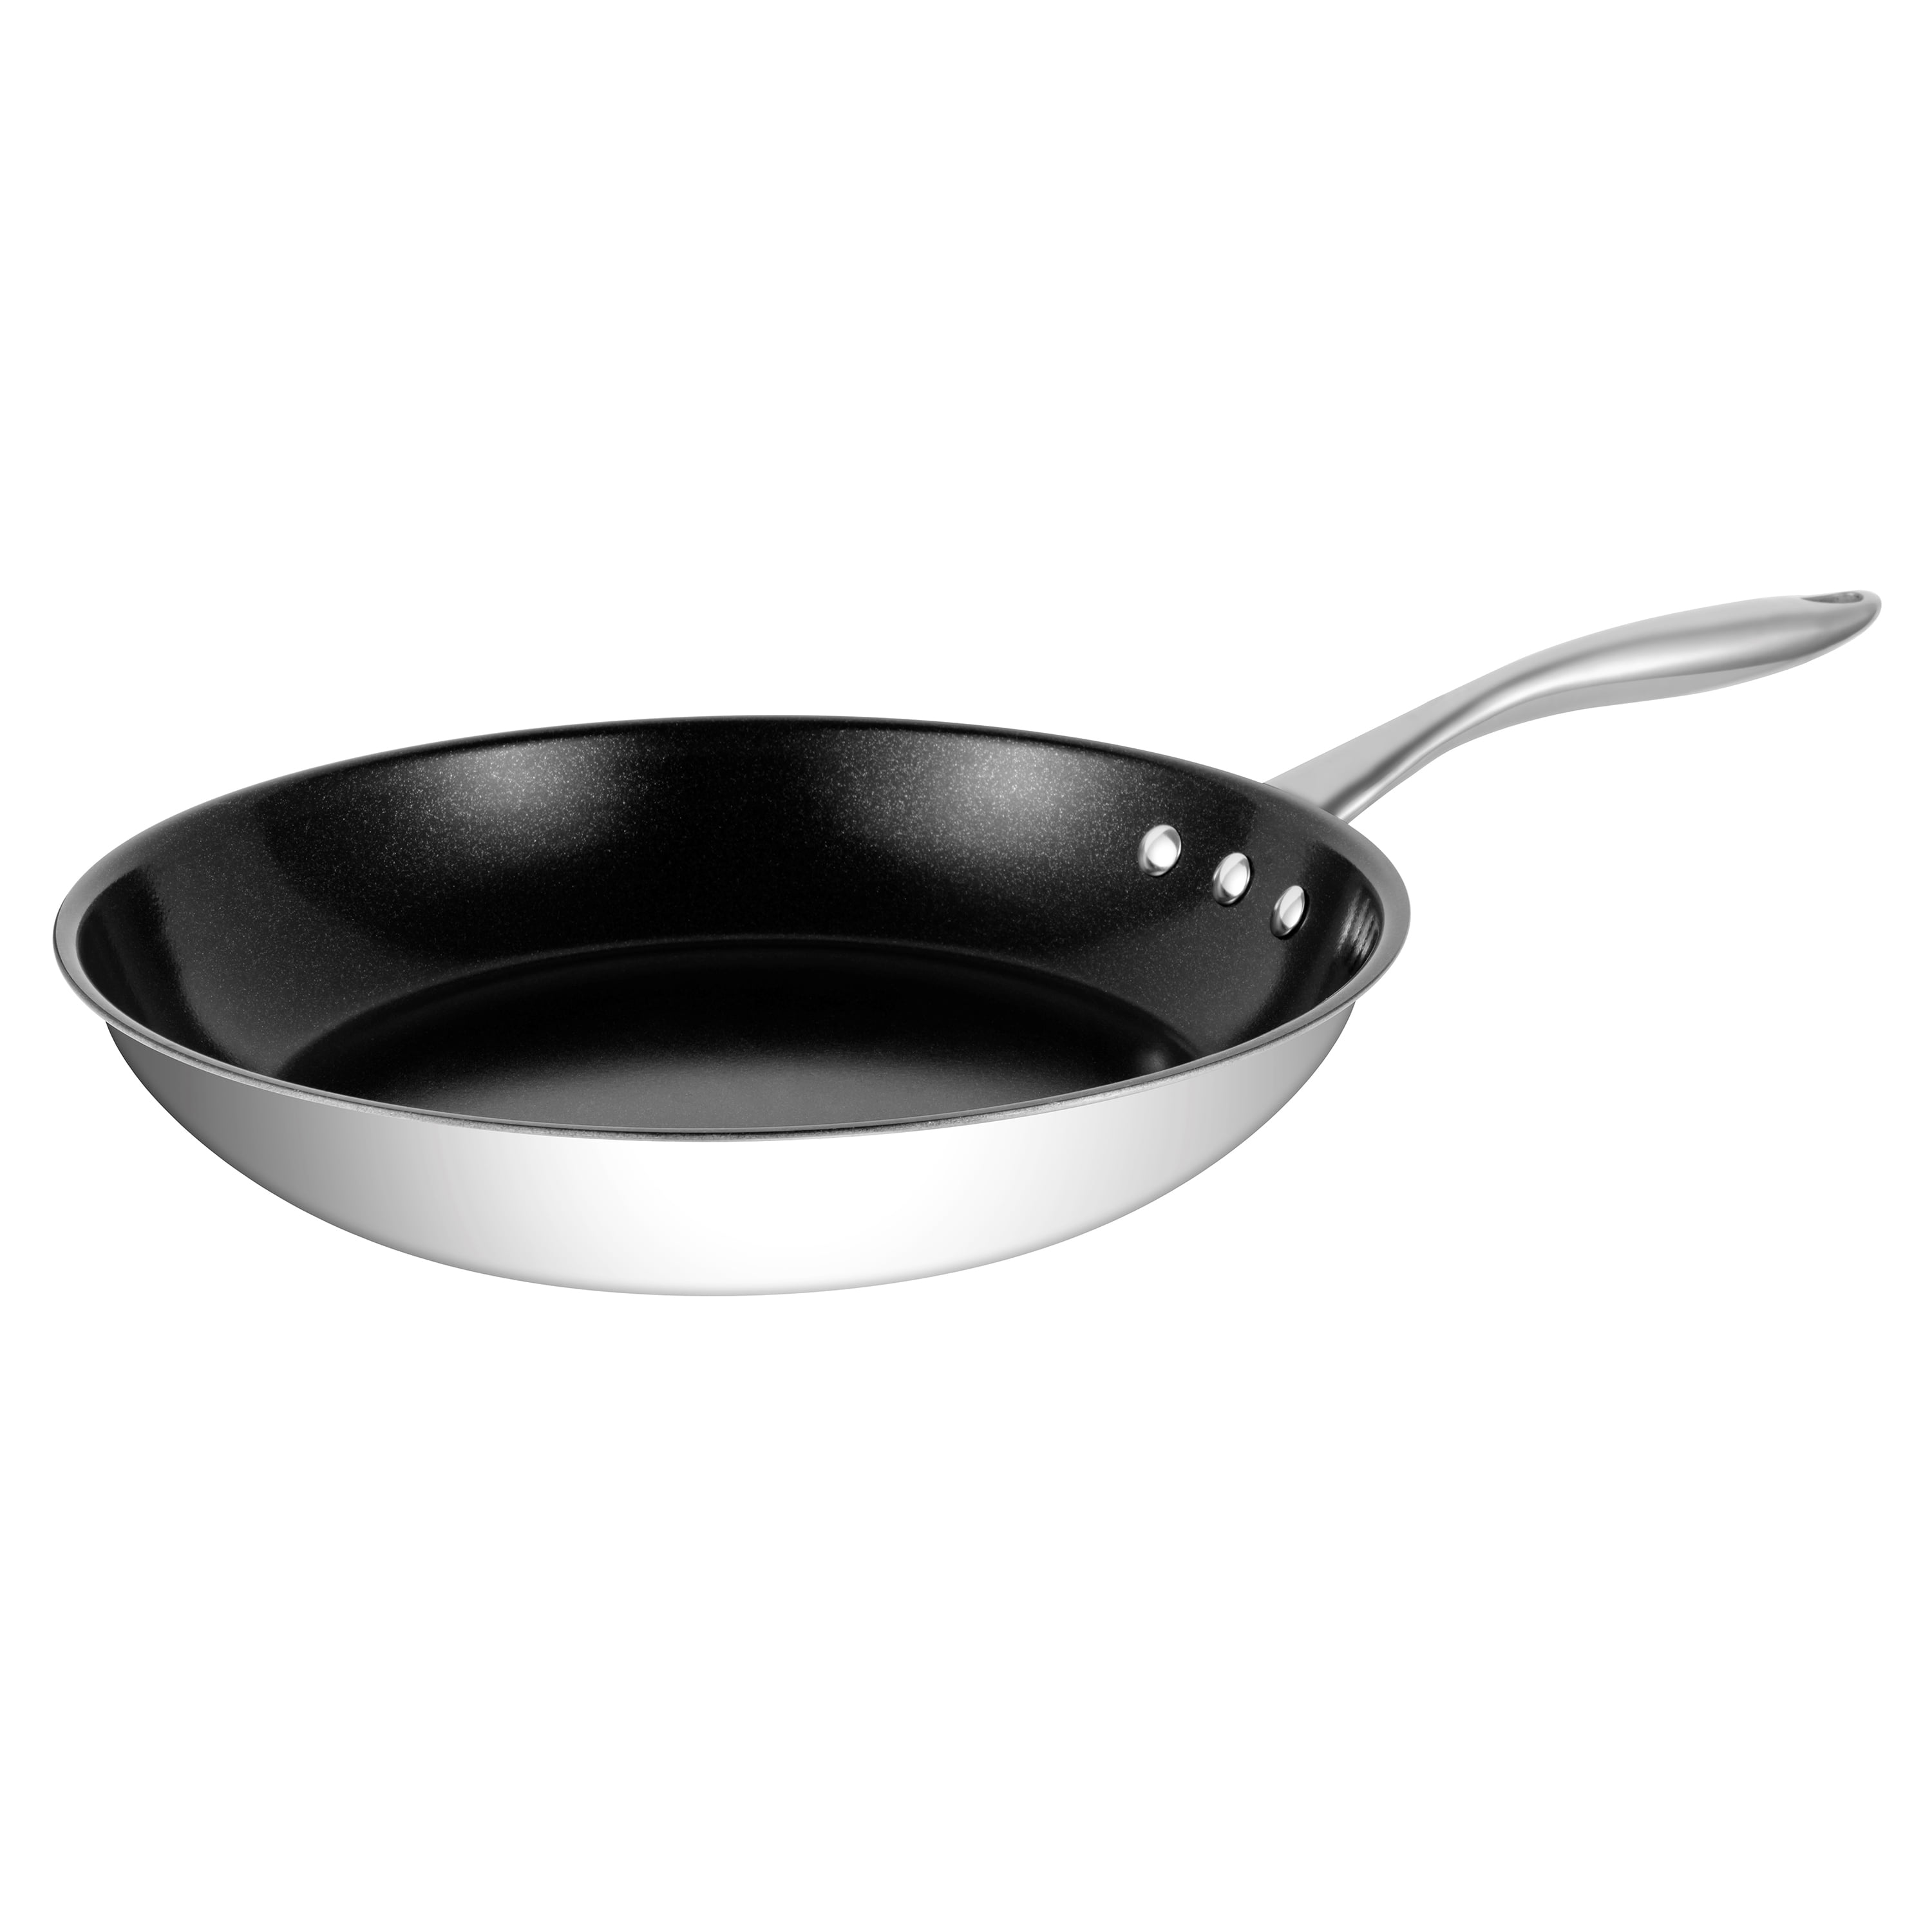 HexClad 8 Inch Hybrid Stainless Steel Frying Pan with Stay-Cool Handle -  PFOA Free, Dishwasher and